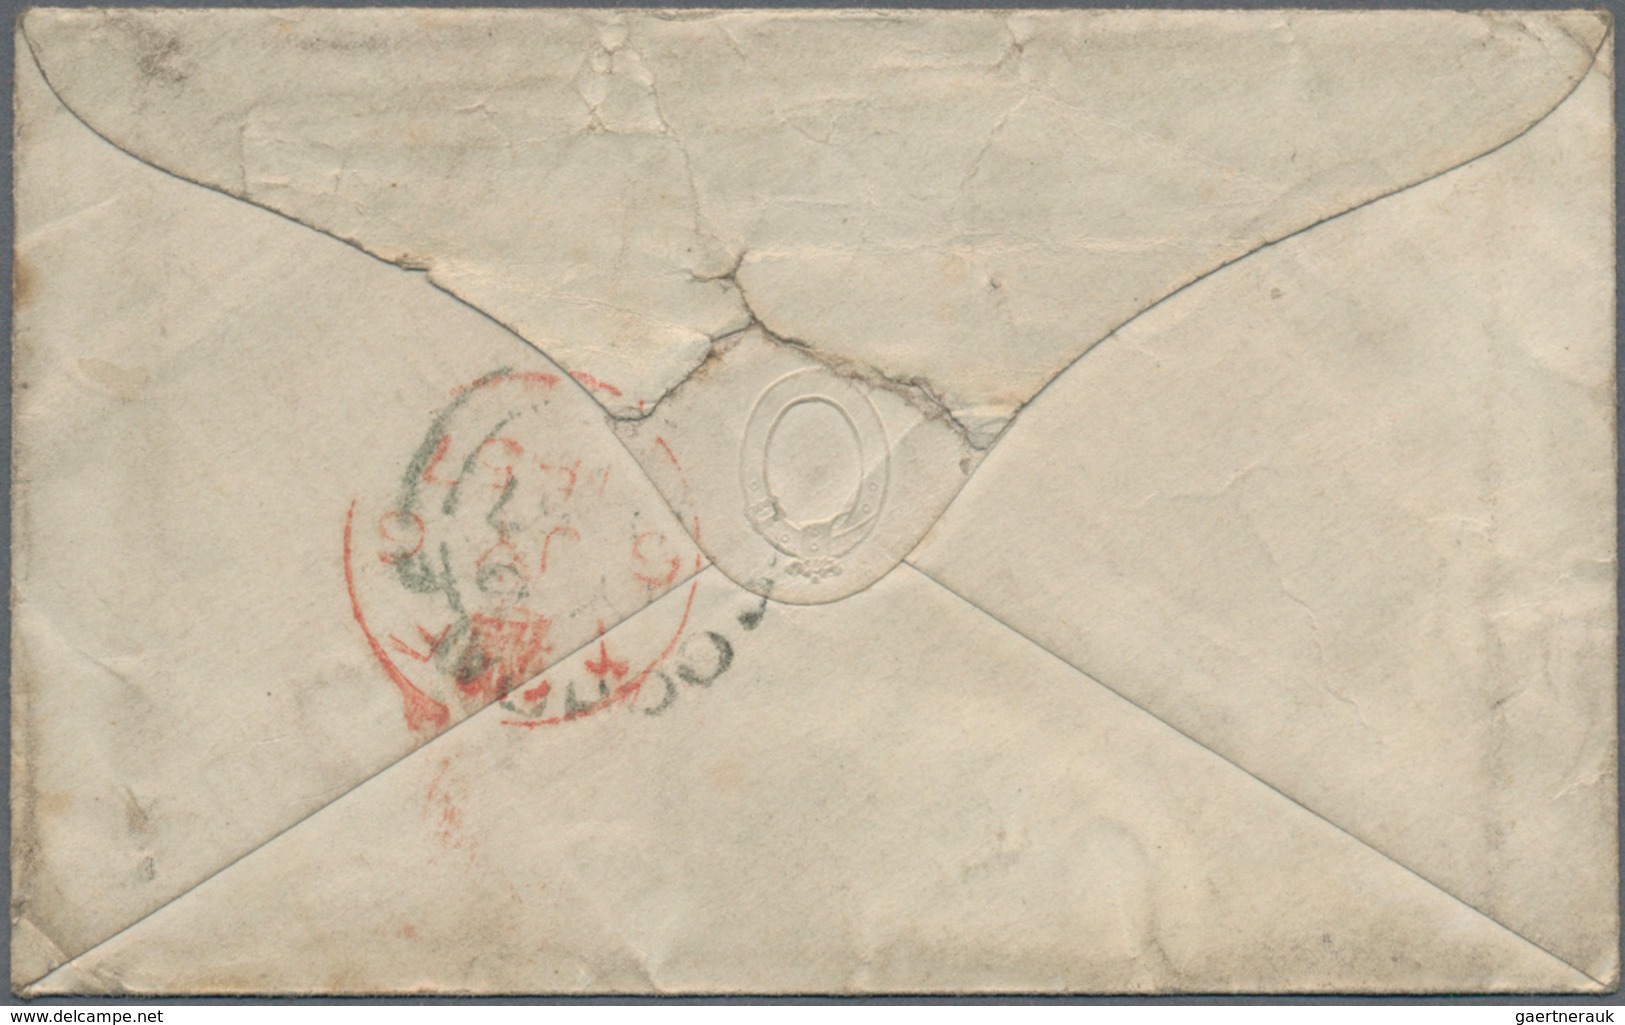 08116 China: 1857-58 Correspondence from and to James Emmett on board H.M.S. "Niger" at CANTON RIVER and i